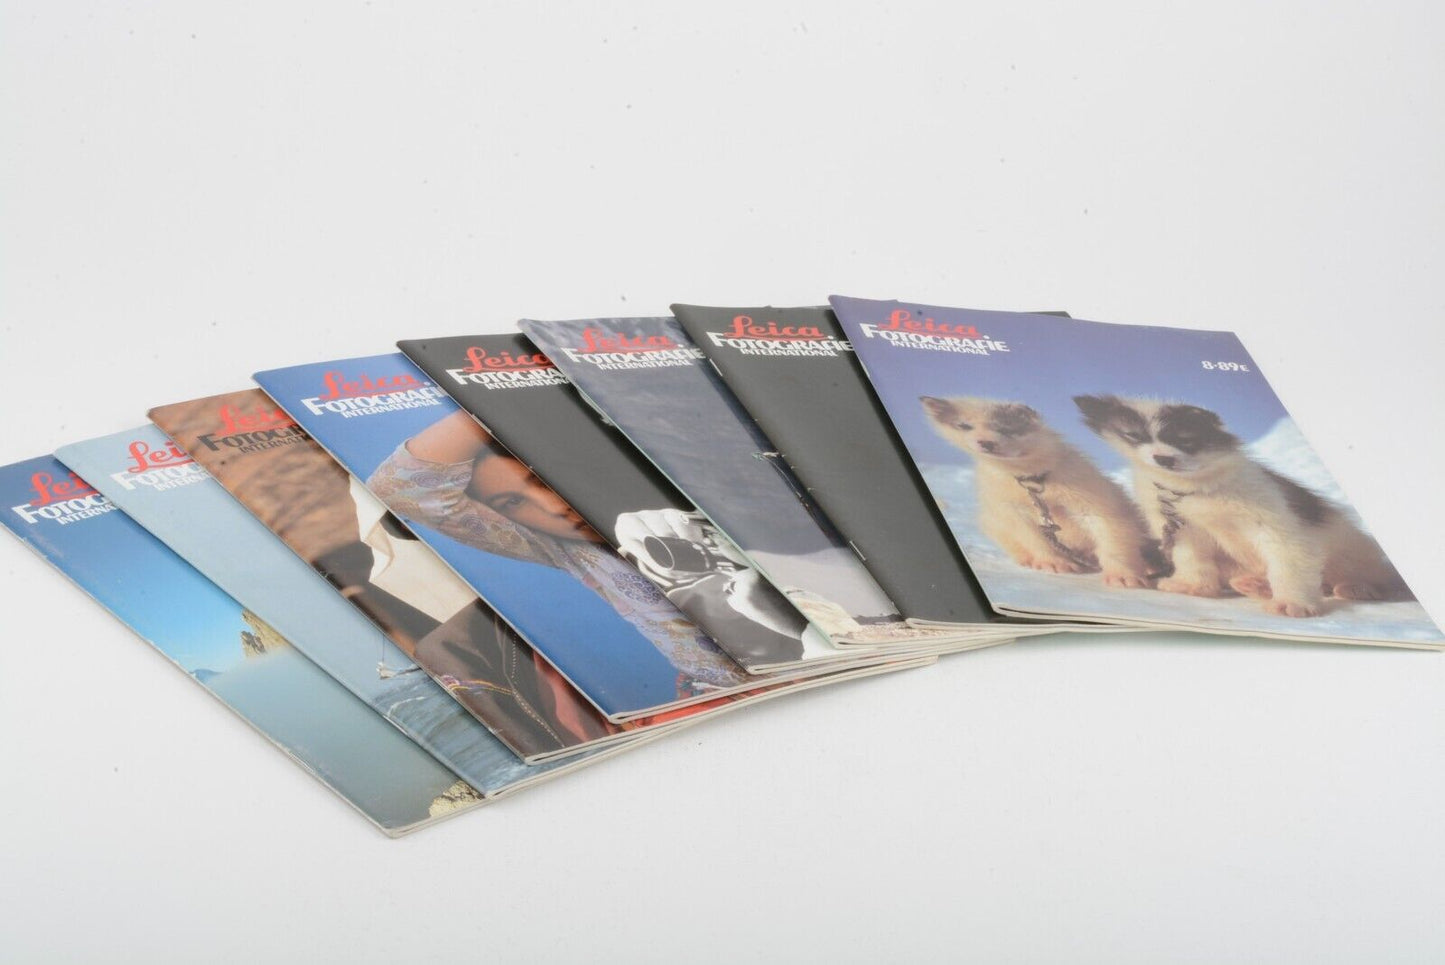 8X LEICA FOTOGRAFIE 1989 ISSUES MAGAZINES, CLEAN AND COMPLETE